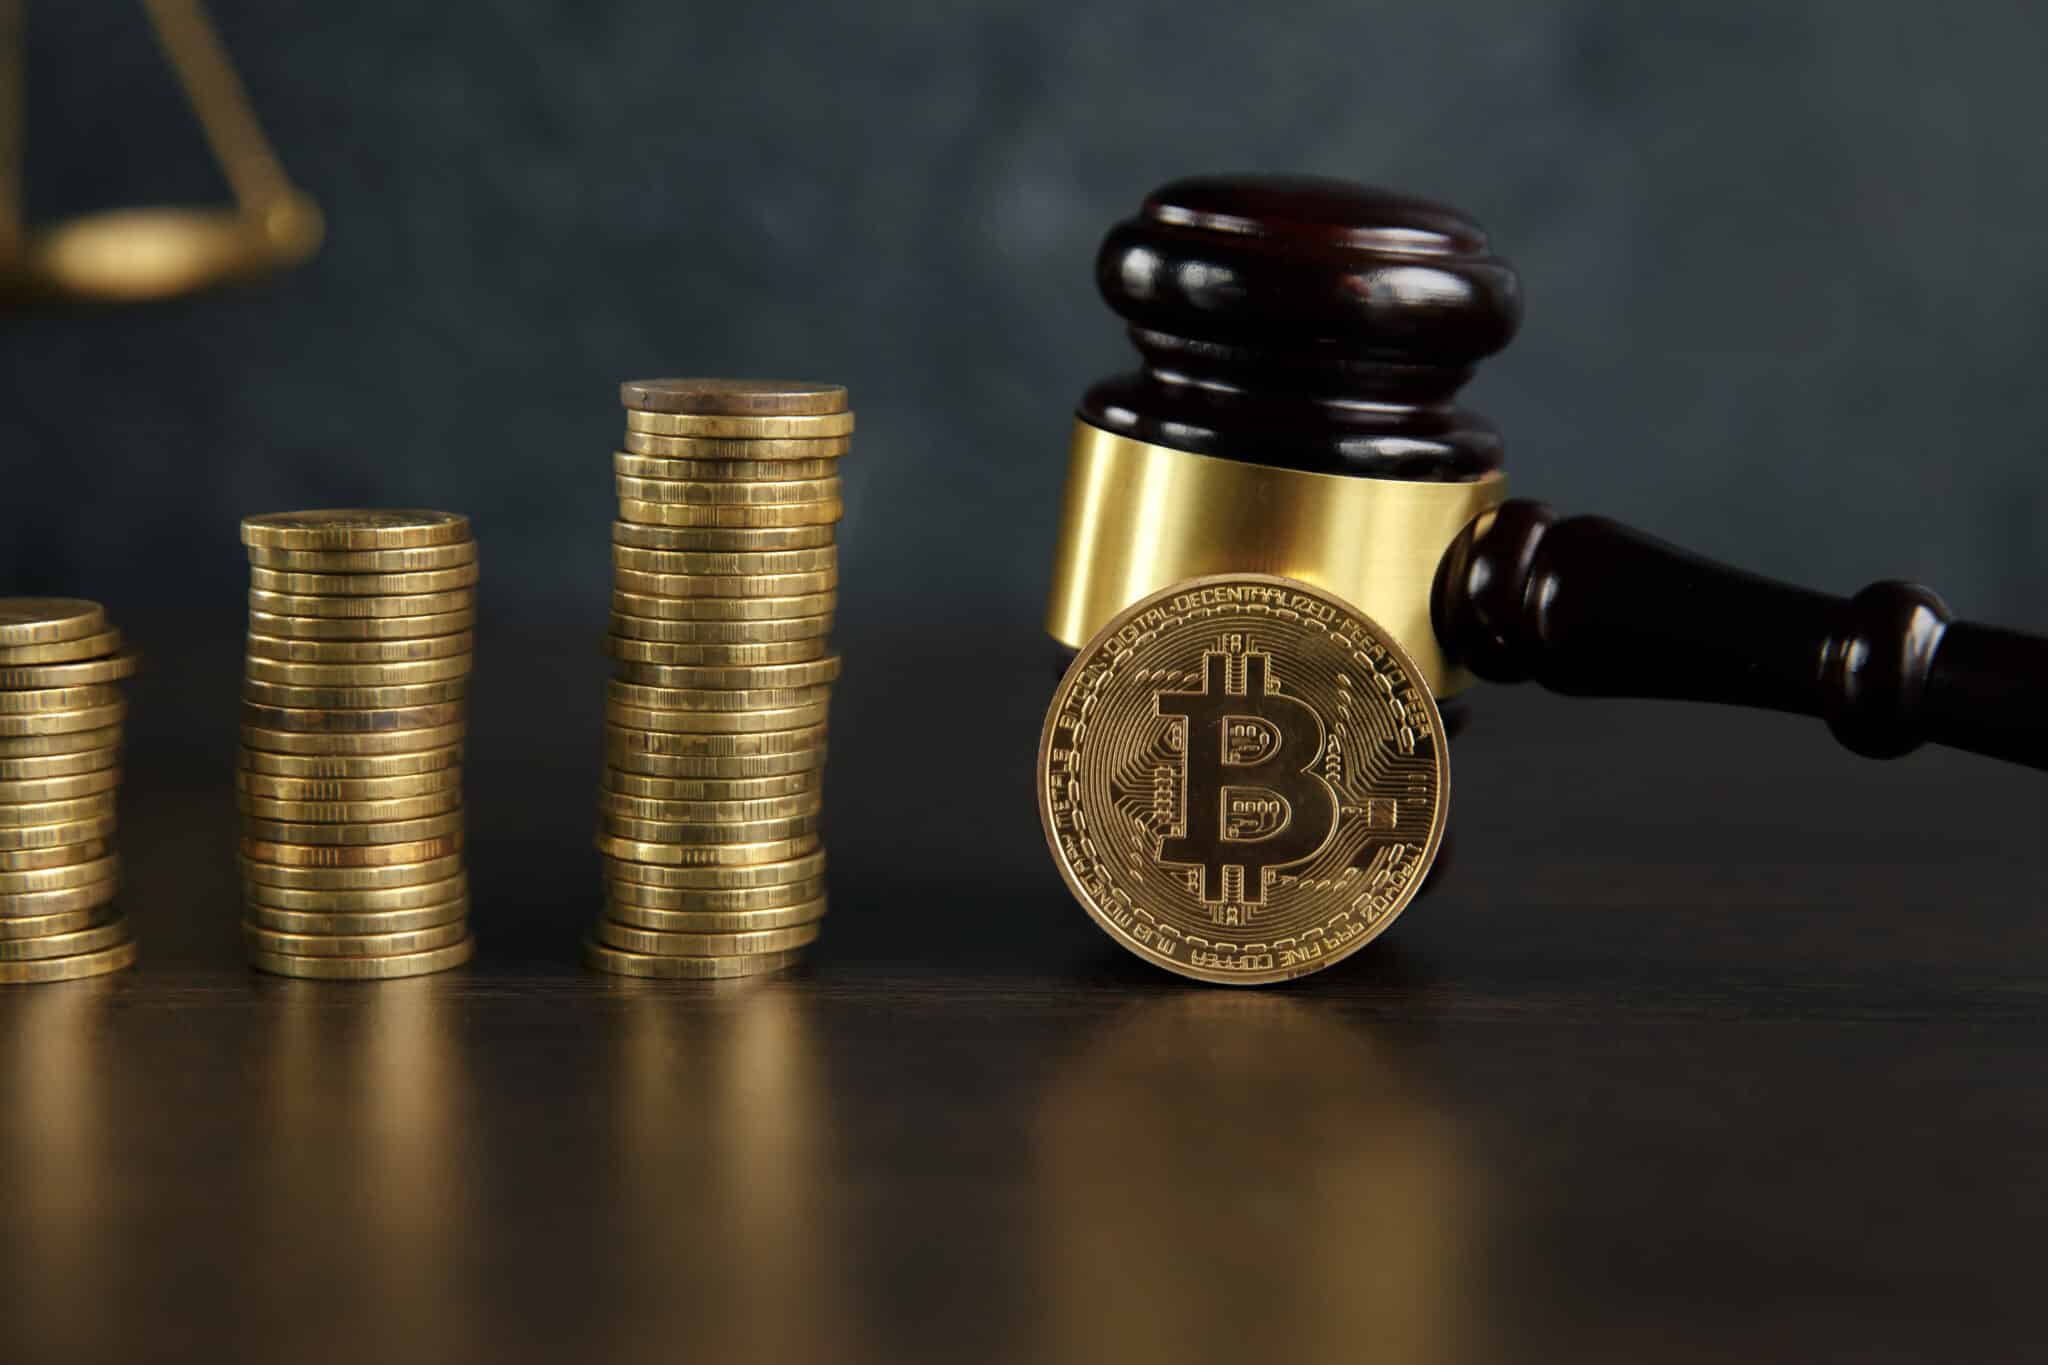 Auction gavel and bitcoin cryptocurrency money on a wooden desk, close-up. Law Gavel and golden bitcoin symbol on white background with